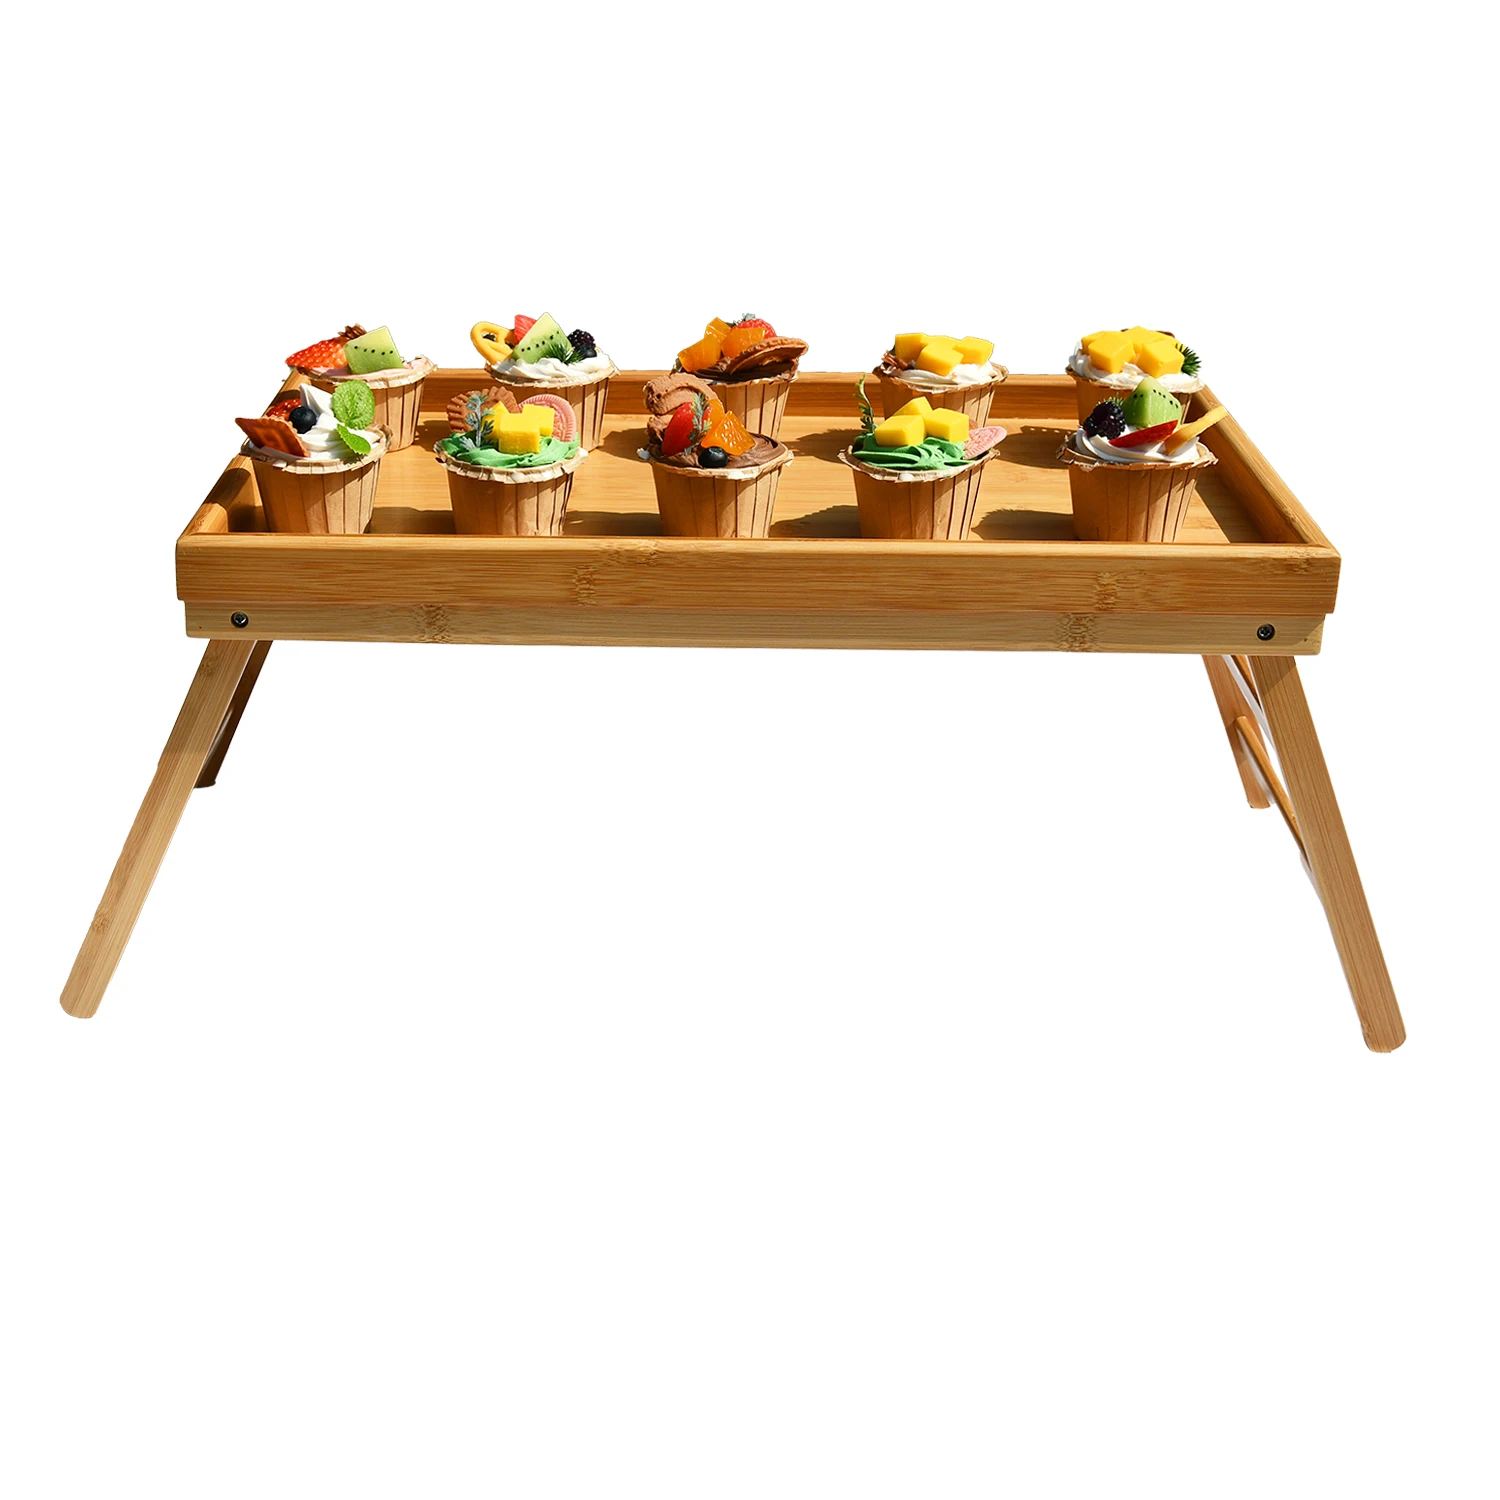 Hot Selling Professional Large Custom Luxury Kitchen Bamboo Serving Tray With Foldable Leg